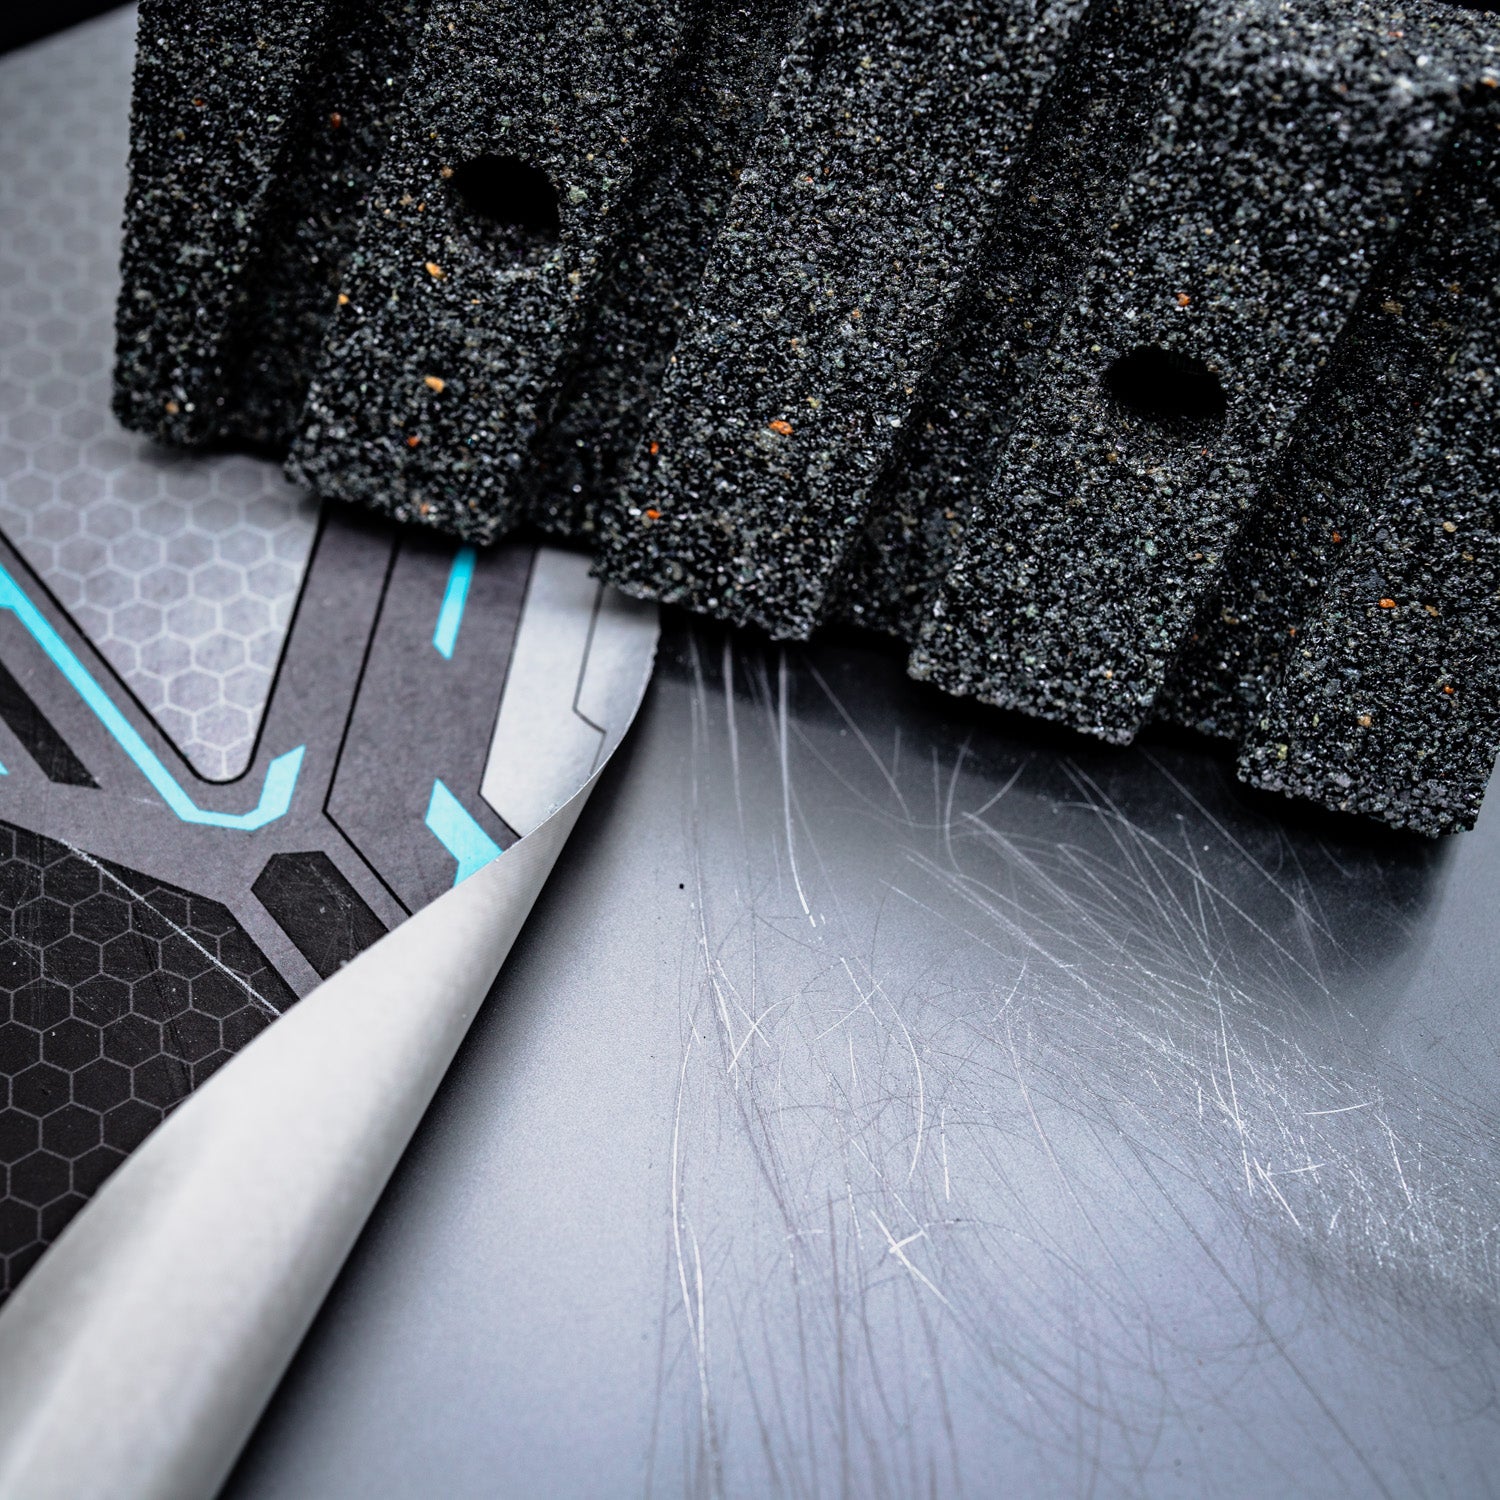 Skins help absorb the surface scratches that leave your devices looking worn.